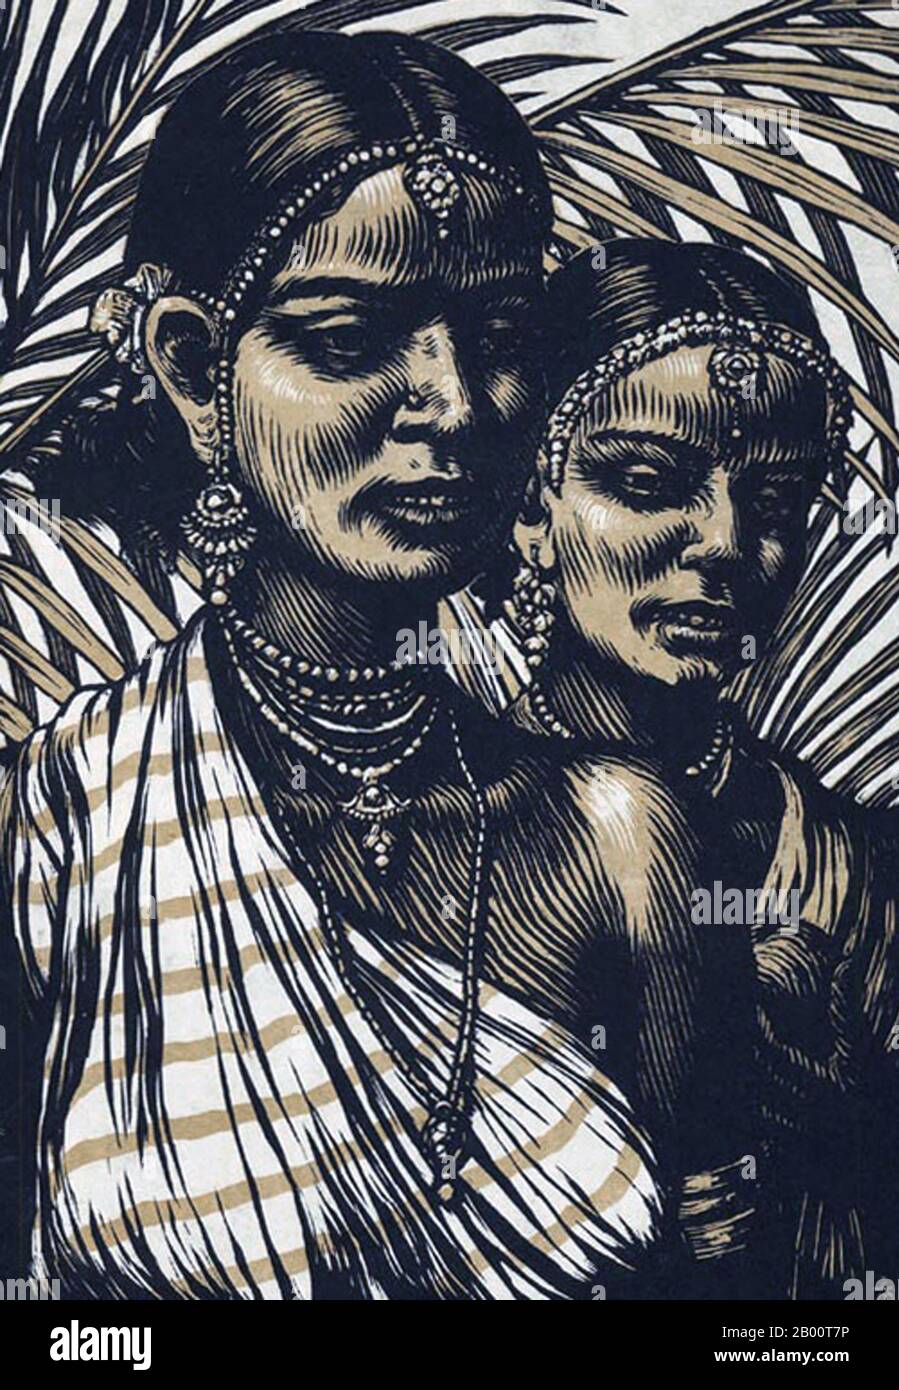 Sri Lanka/Czechoslovakia: 'Portrait of Two Sinhalese Women'. Illustration by T. F. Simon (1877-1942), c. 1928.  Tavik Frantisek Simon (1877–1942), was a Czech painter, etcher, and woodcut artist. Although based mainly in Europe, his extensive travels took him to Morocco, Ceylon (now Sri Lanka), India, and Japan, images of all of which appear in his  artistic work. He died in Prague in 1942. Largely ignored during the Communist era in Czechoslovakia, his work has received greater attention in recent years. Stock Photo